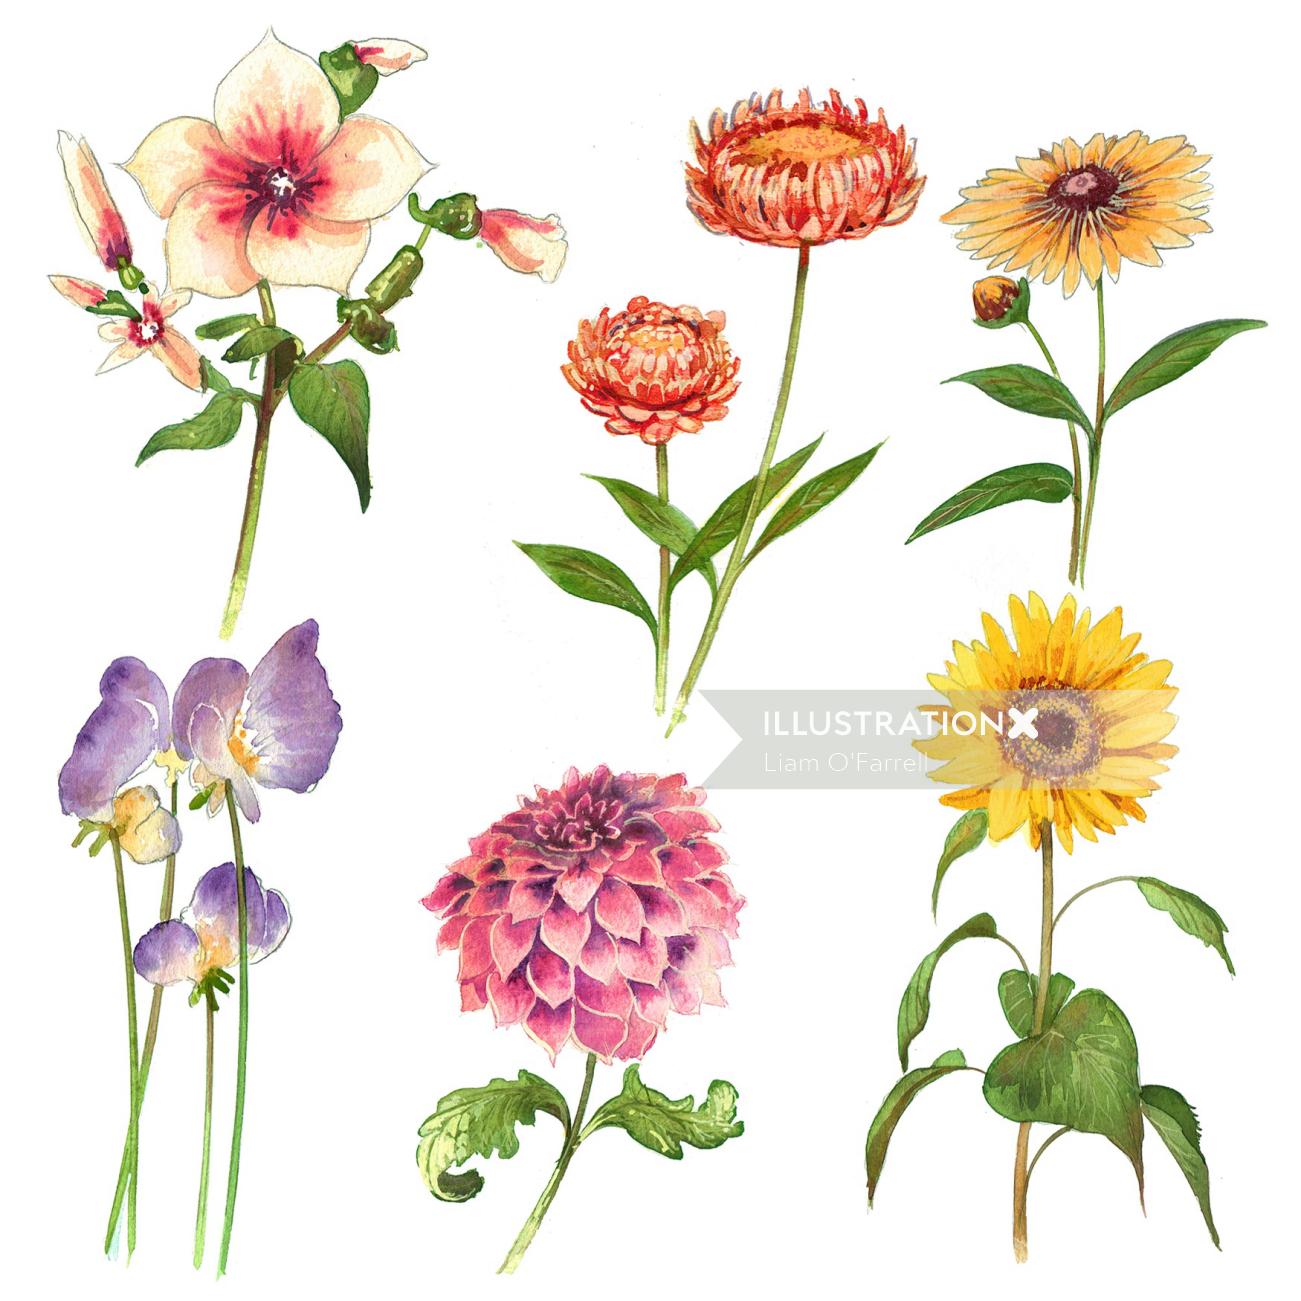 A selection of flowers illustrated by Liam O'Farrell